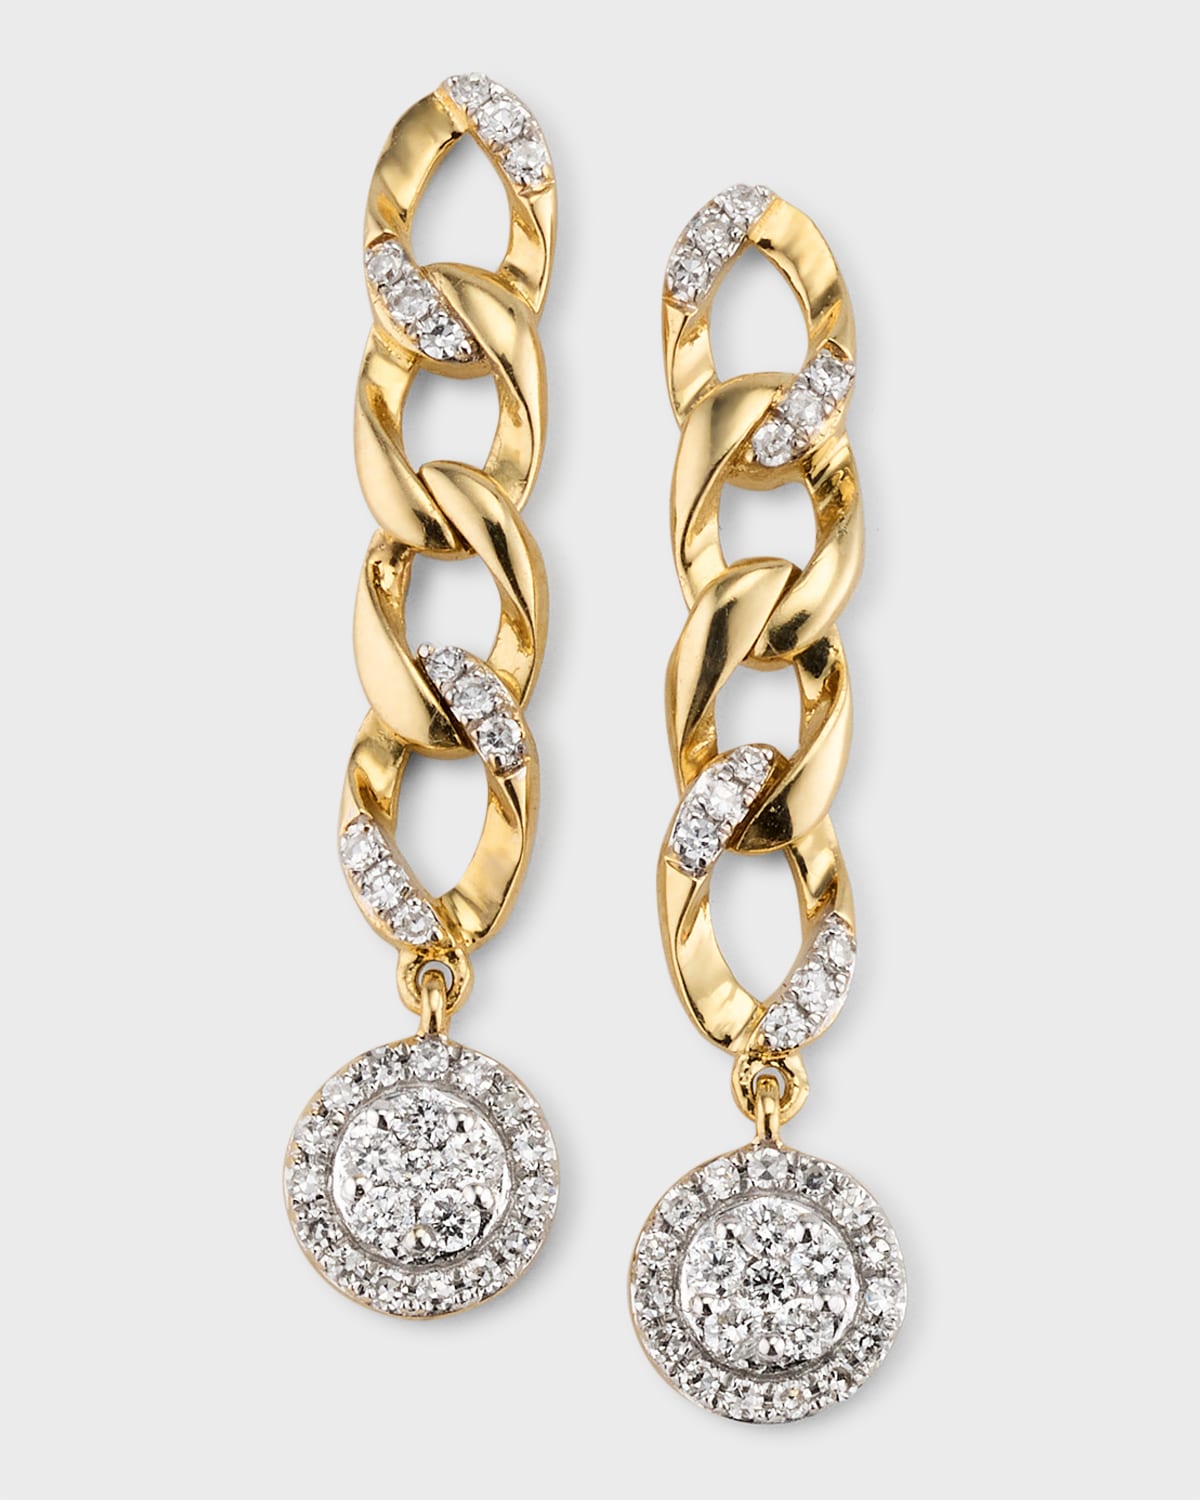 Stone And Strand Pave Diamond Curbside Earrings In Yg